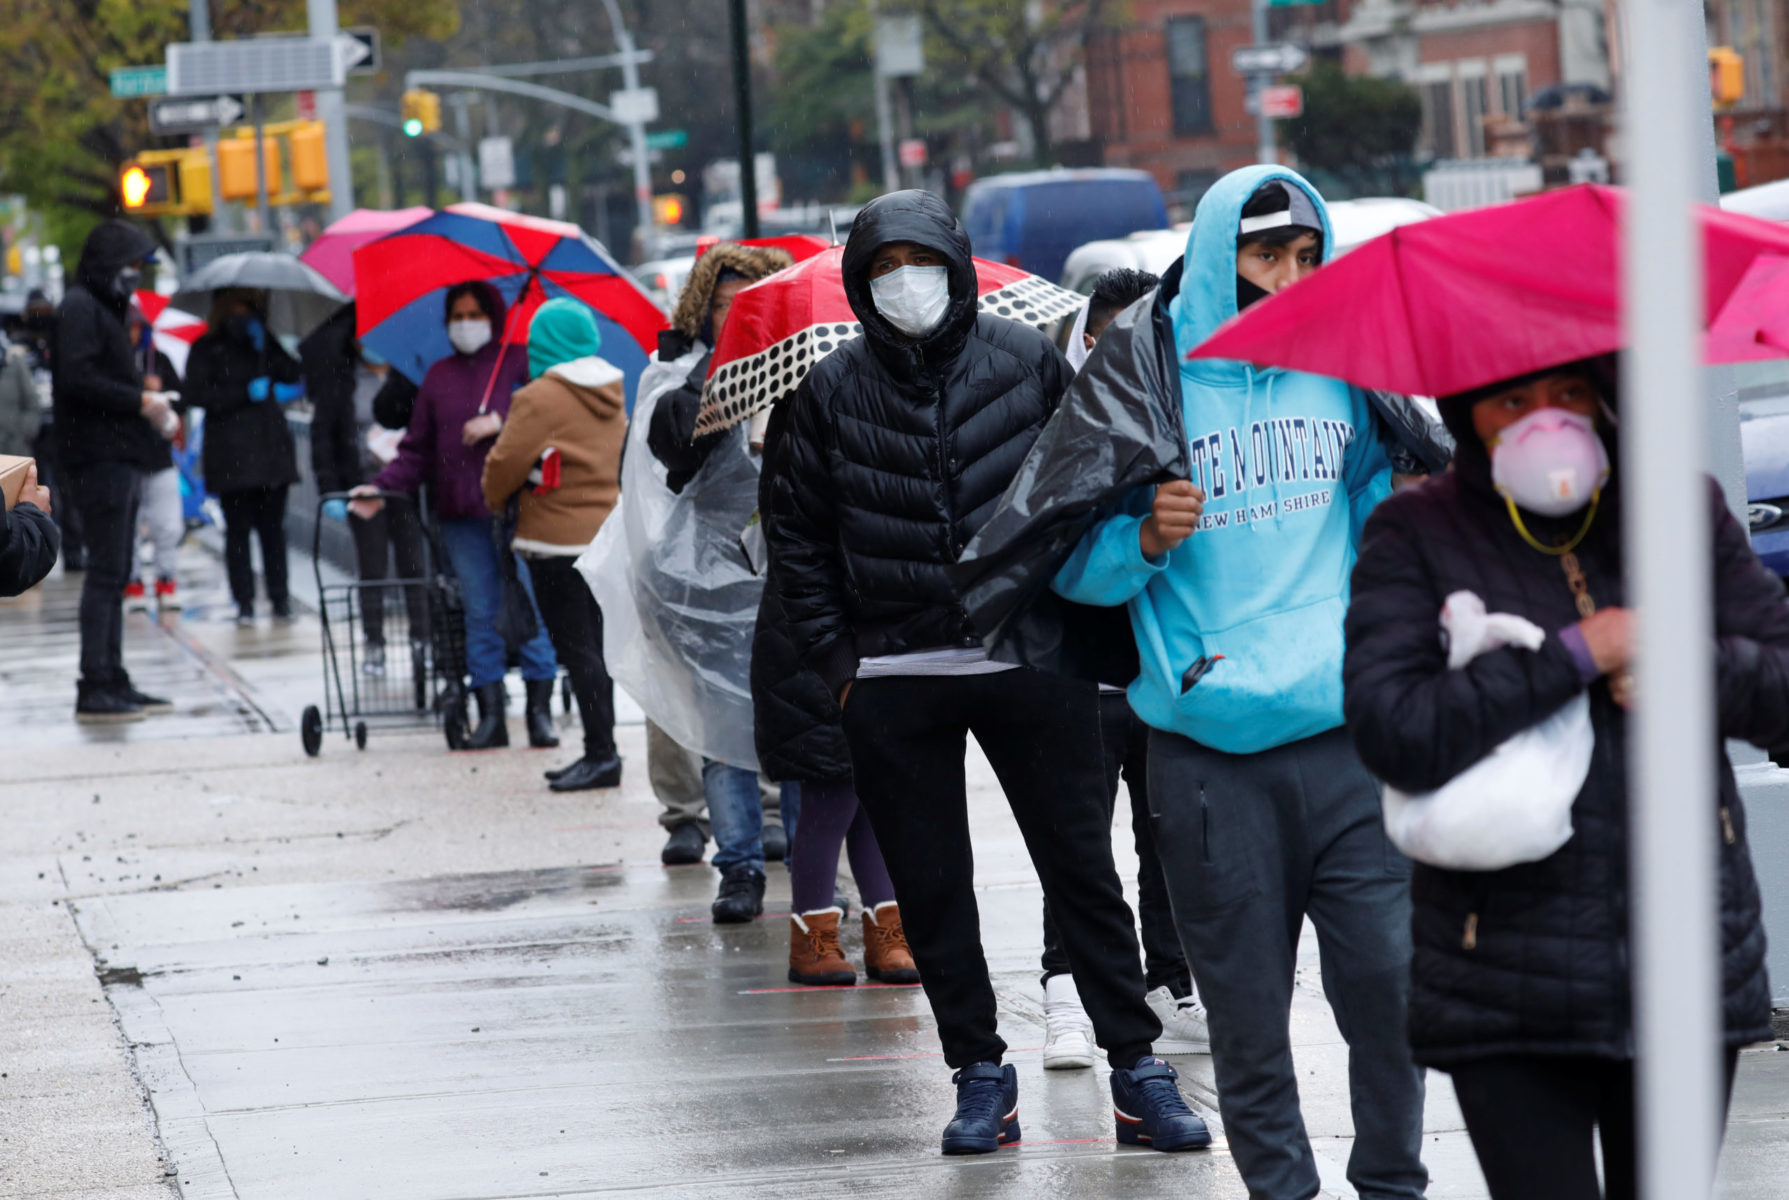 People wear protective face masks as they wait in line to receive free food at a curbside pantry in Brooklyn during the COVID-19 outbreak. / Photo by Mike Segar for REUTERS